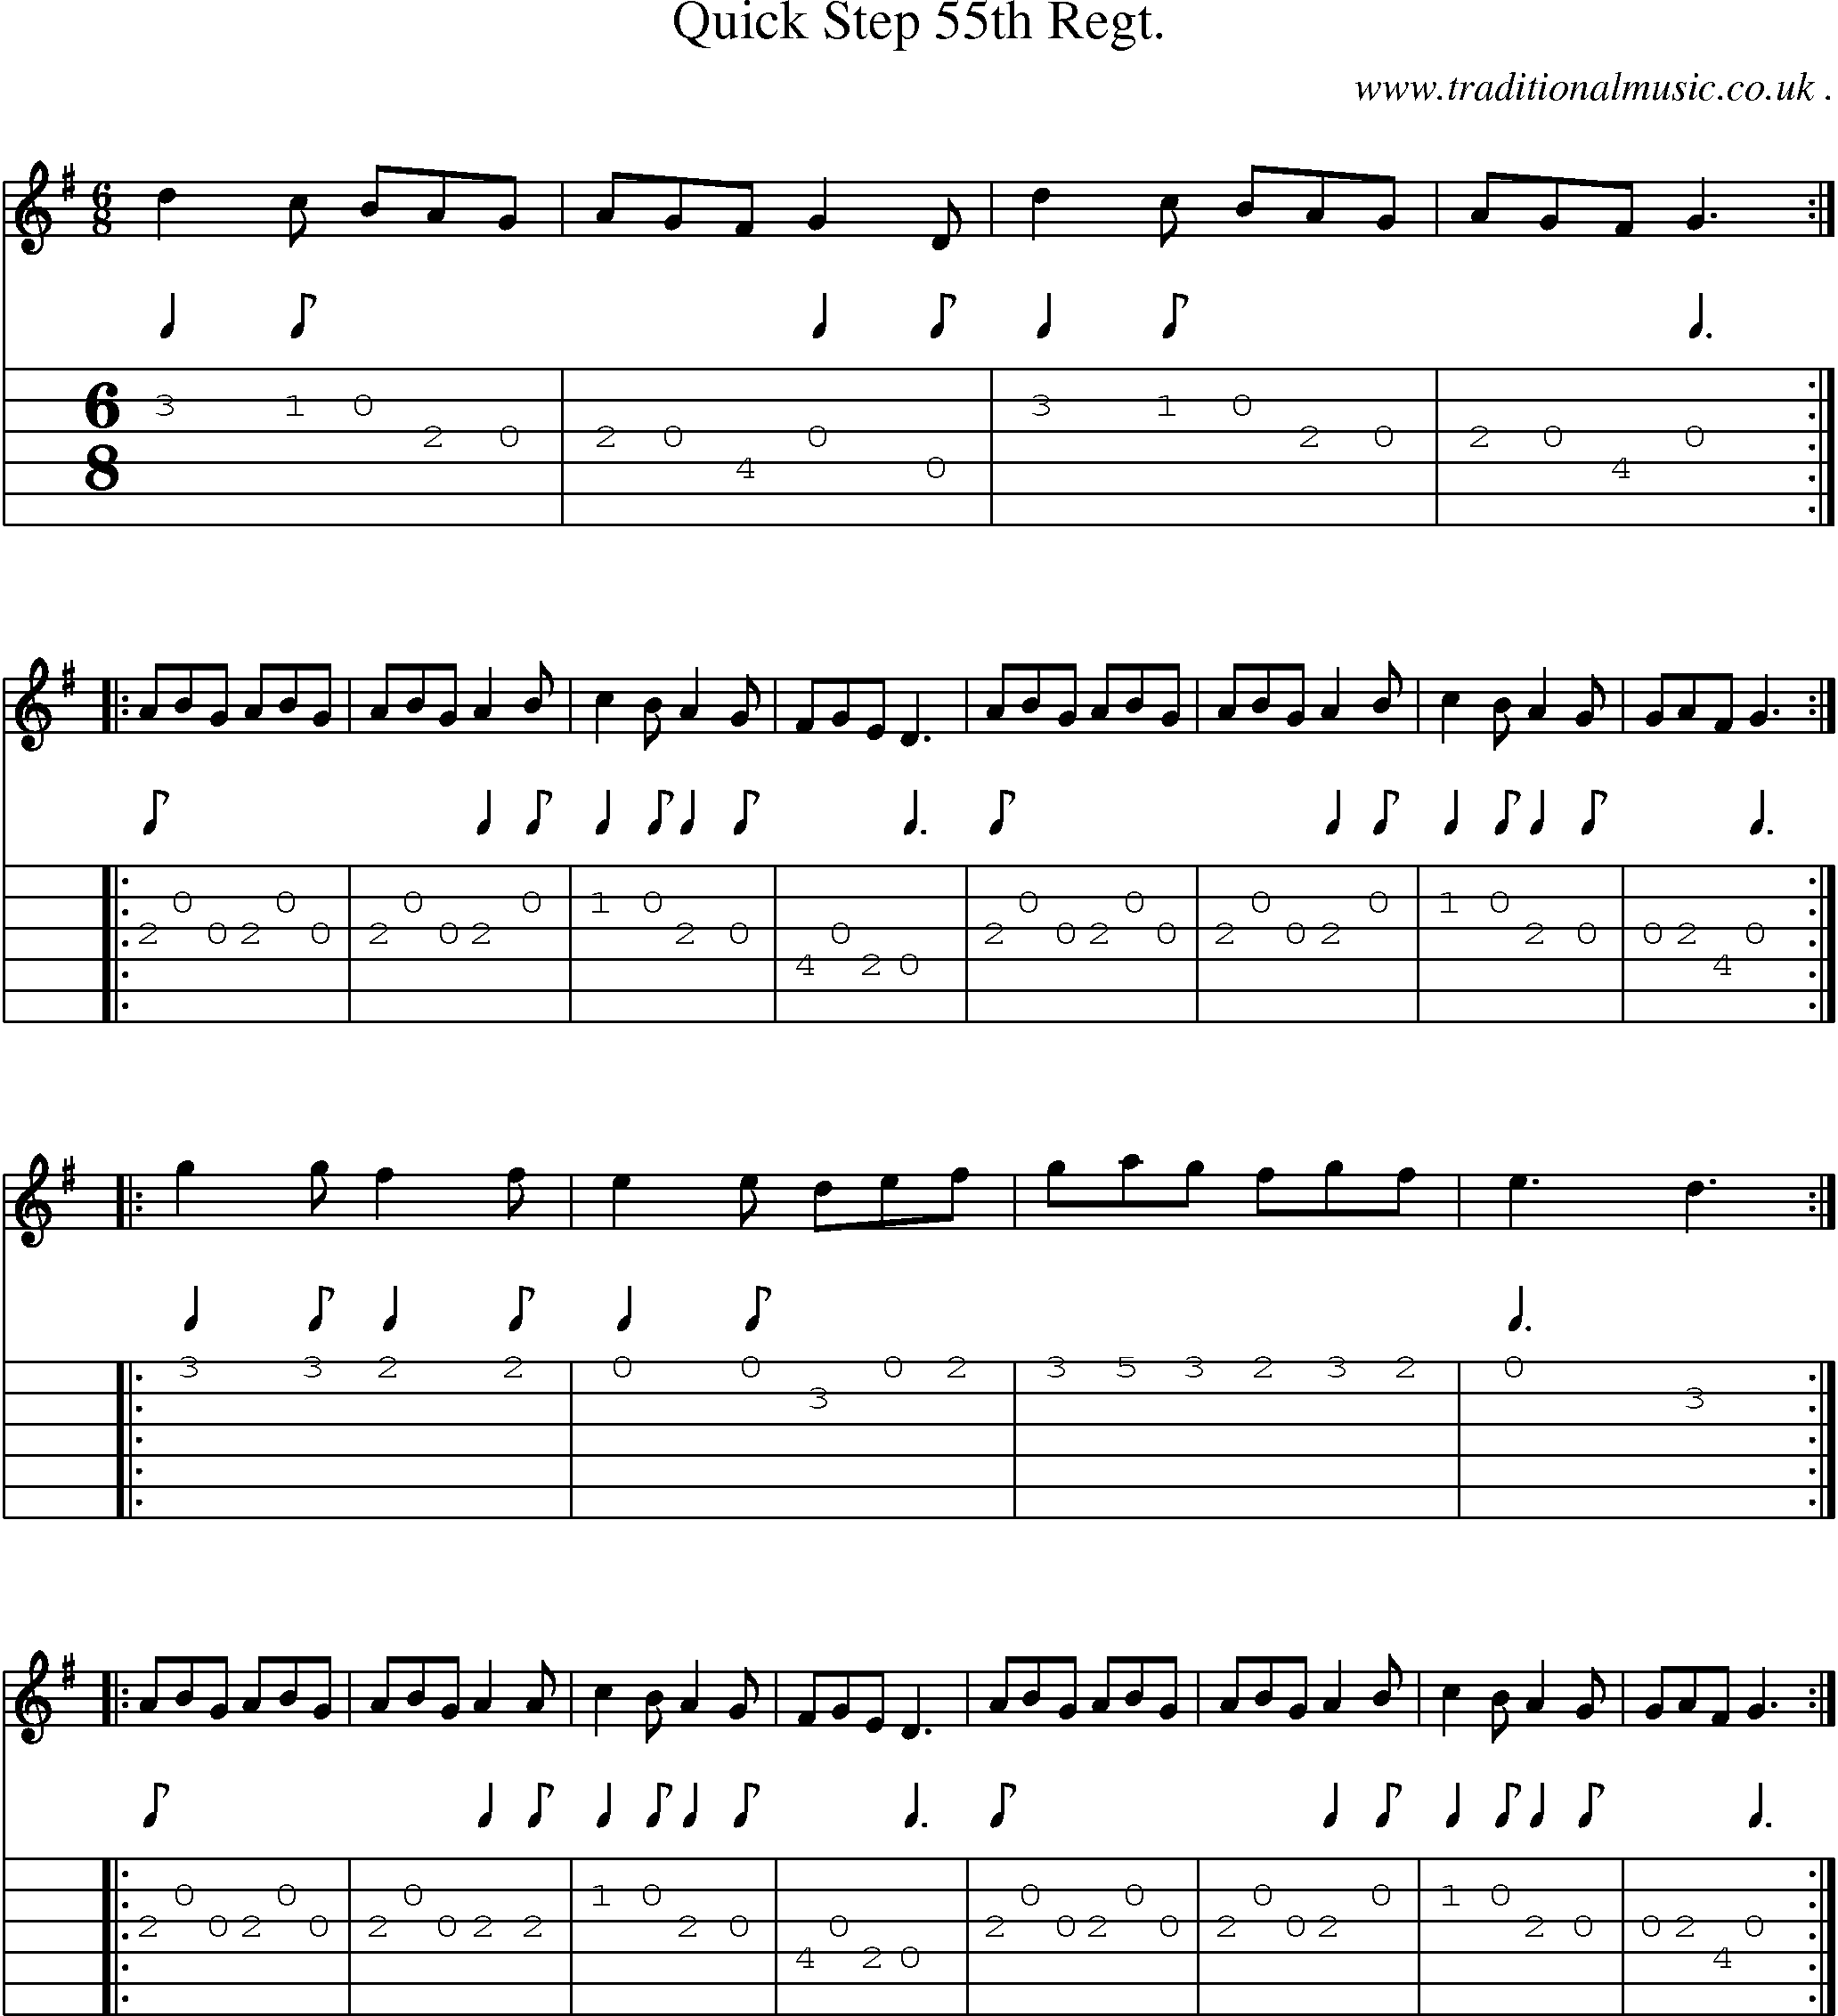 Sheet-music  score, Chords and Guitar Tabs for Quick Step 55th Regt